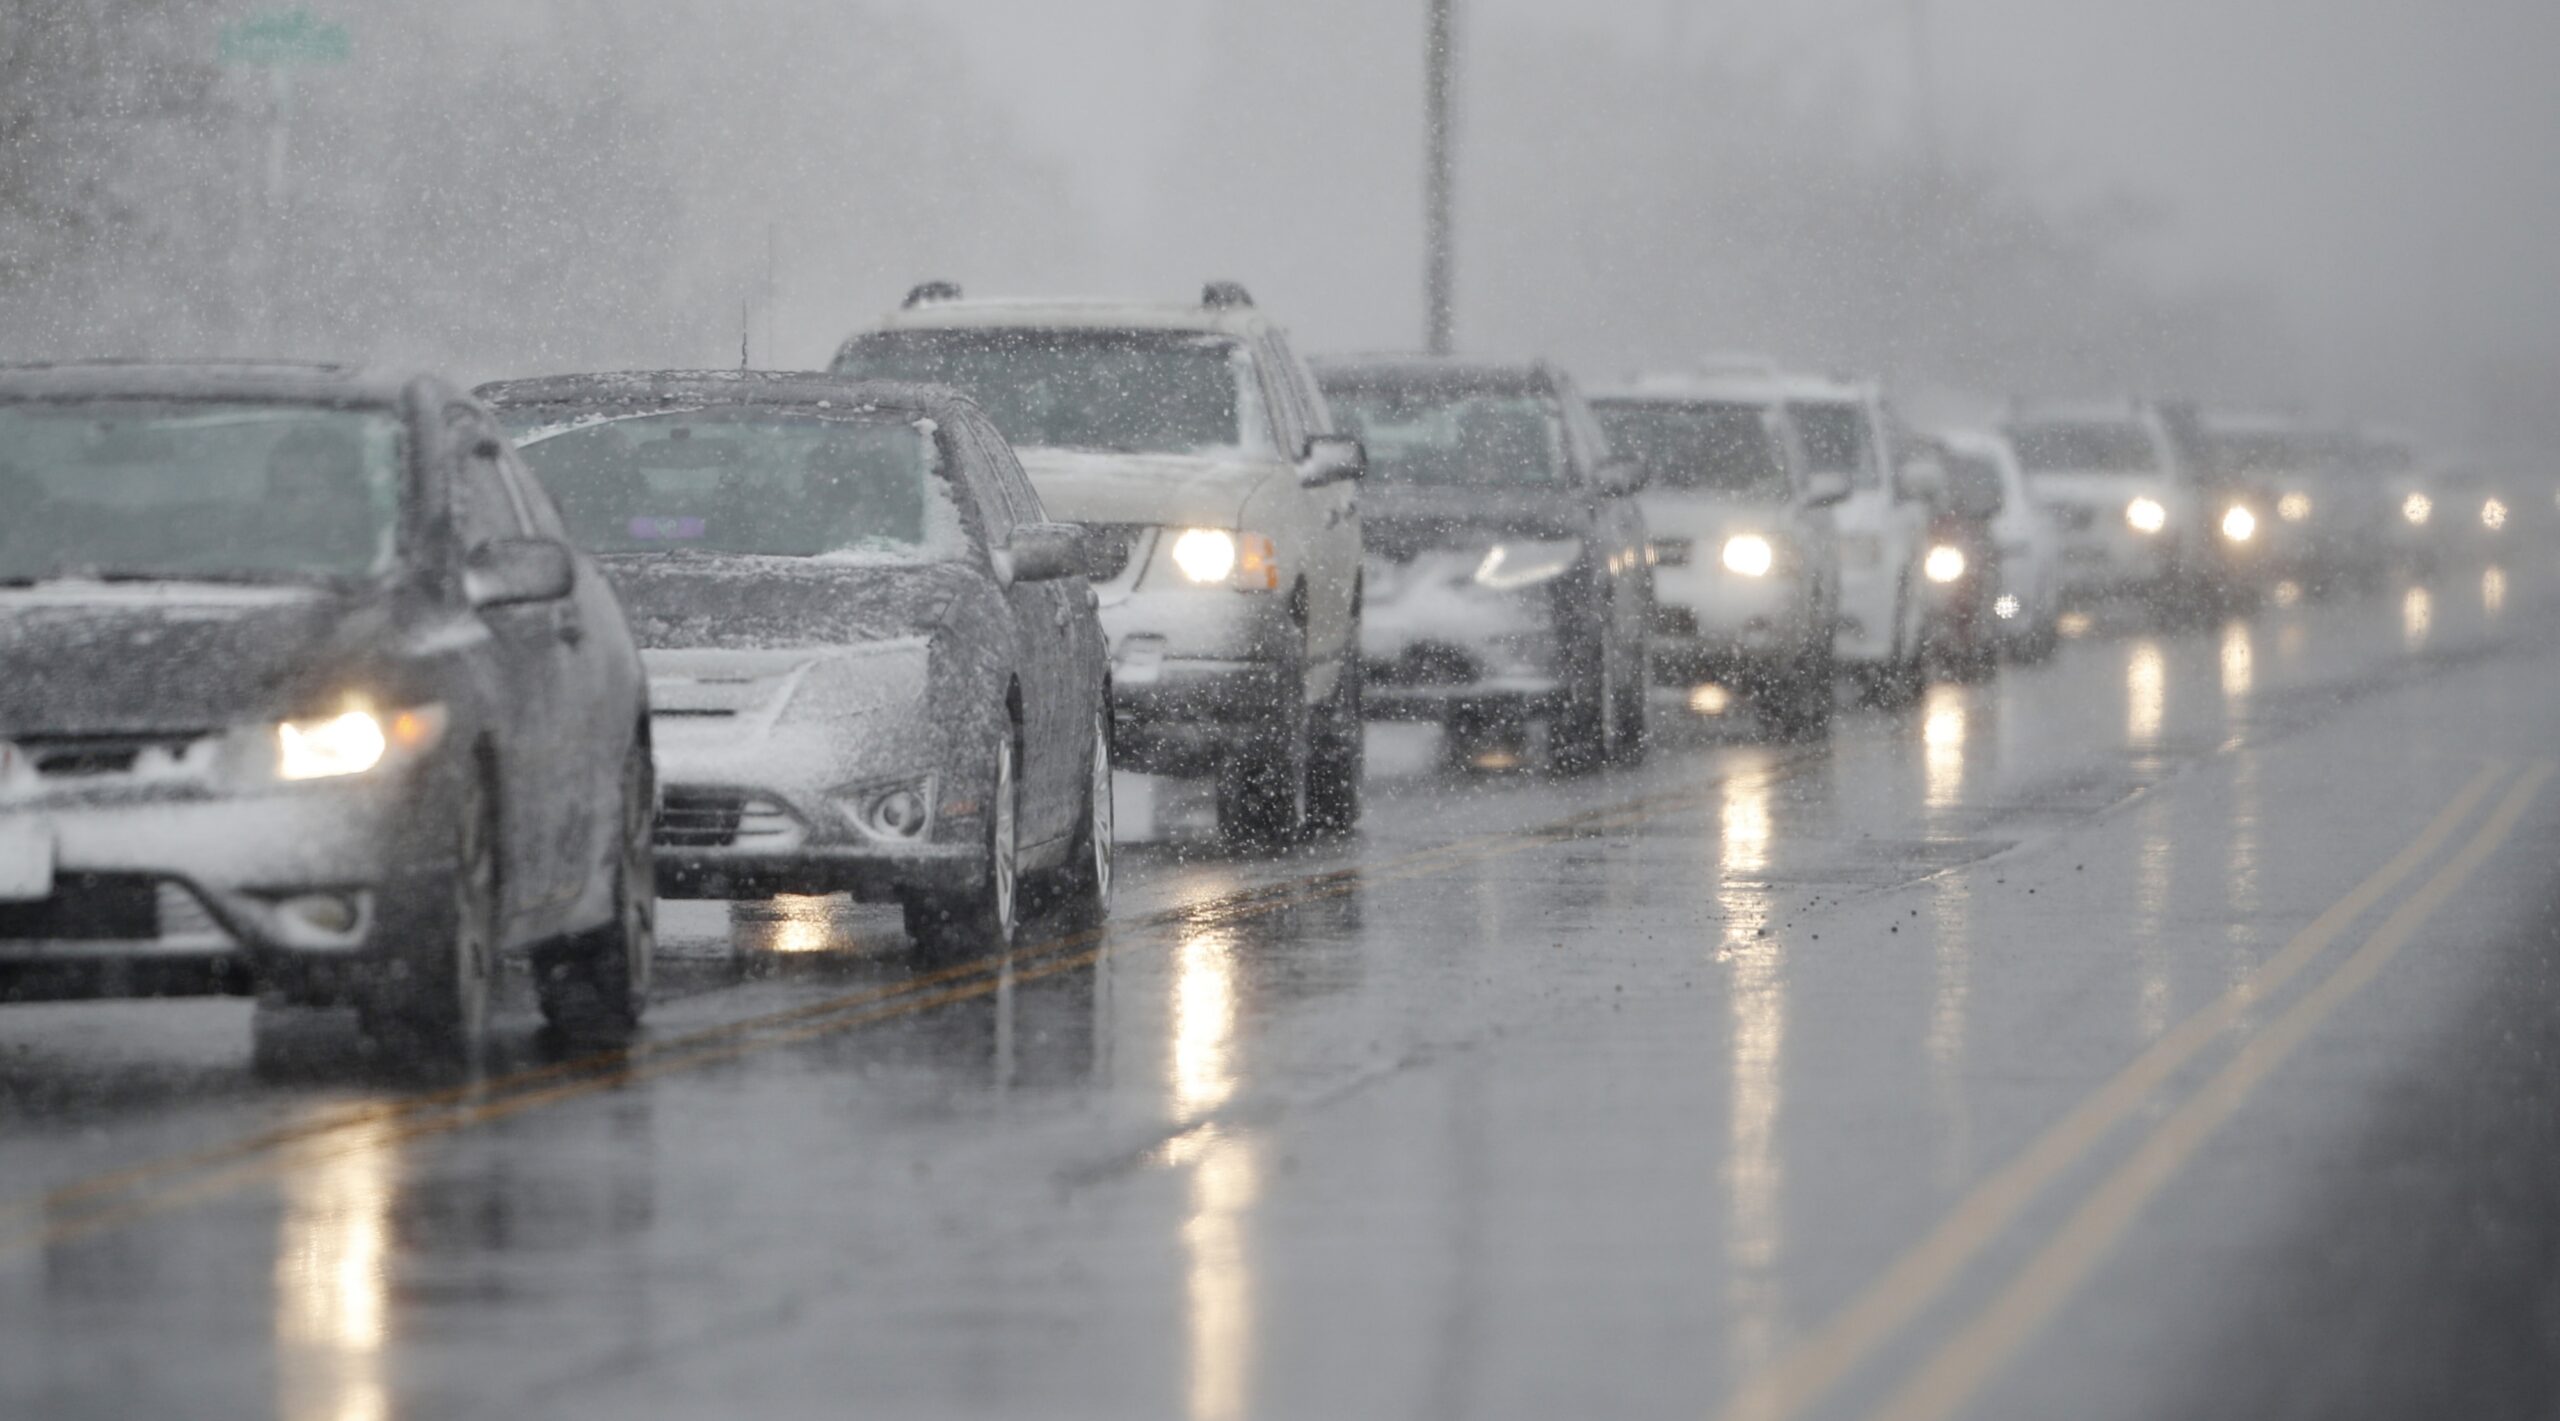 Traffic backs up as a spring winter storm rolls in